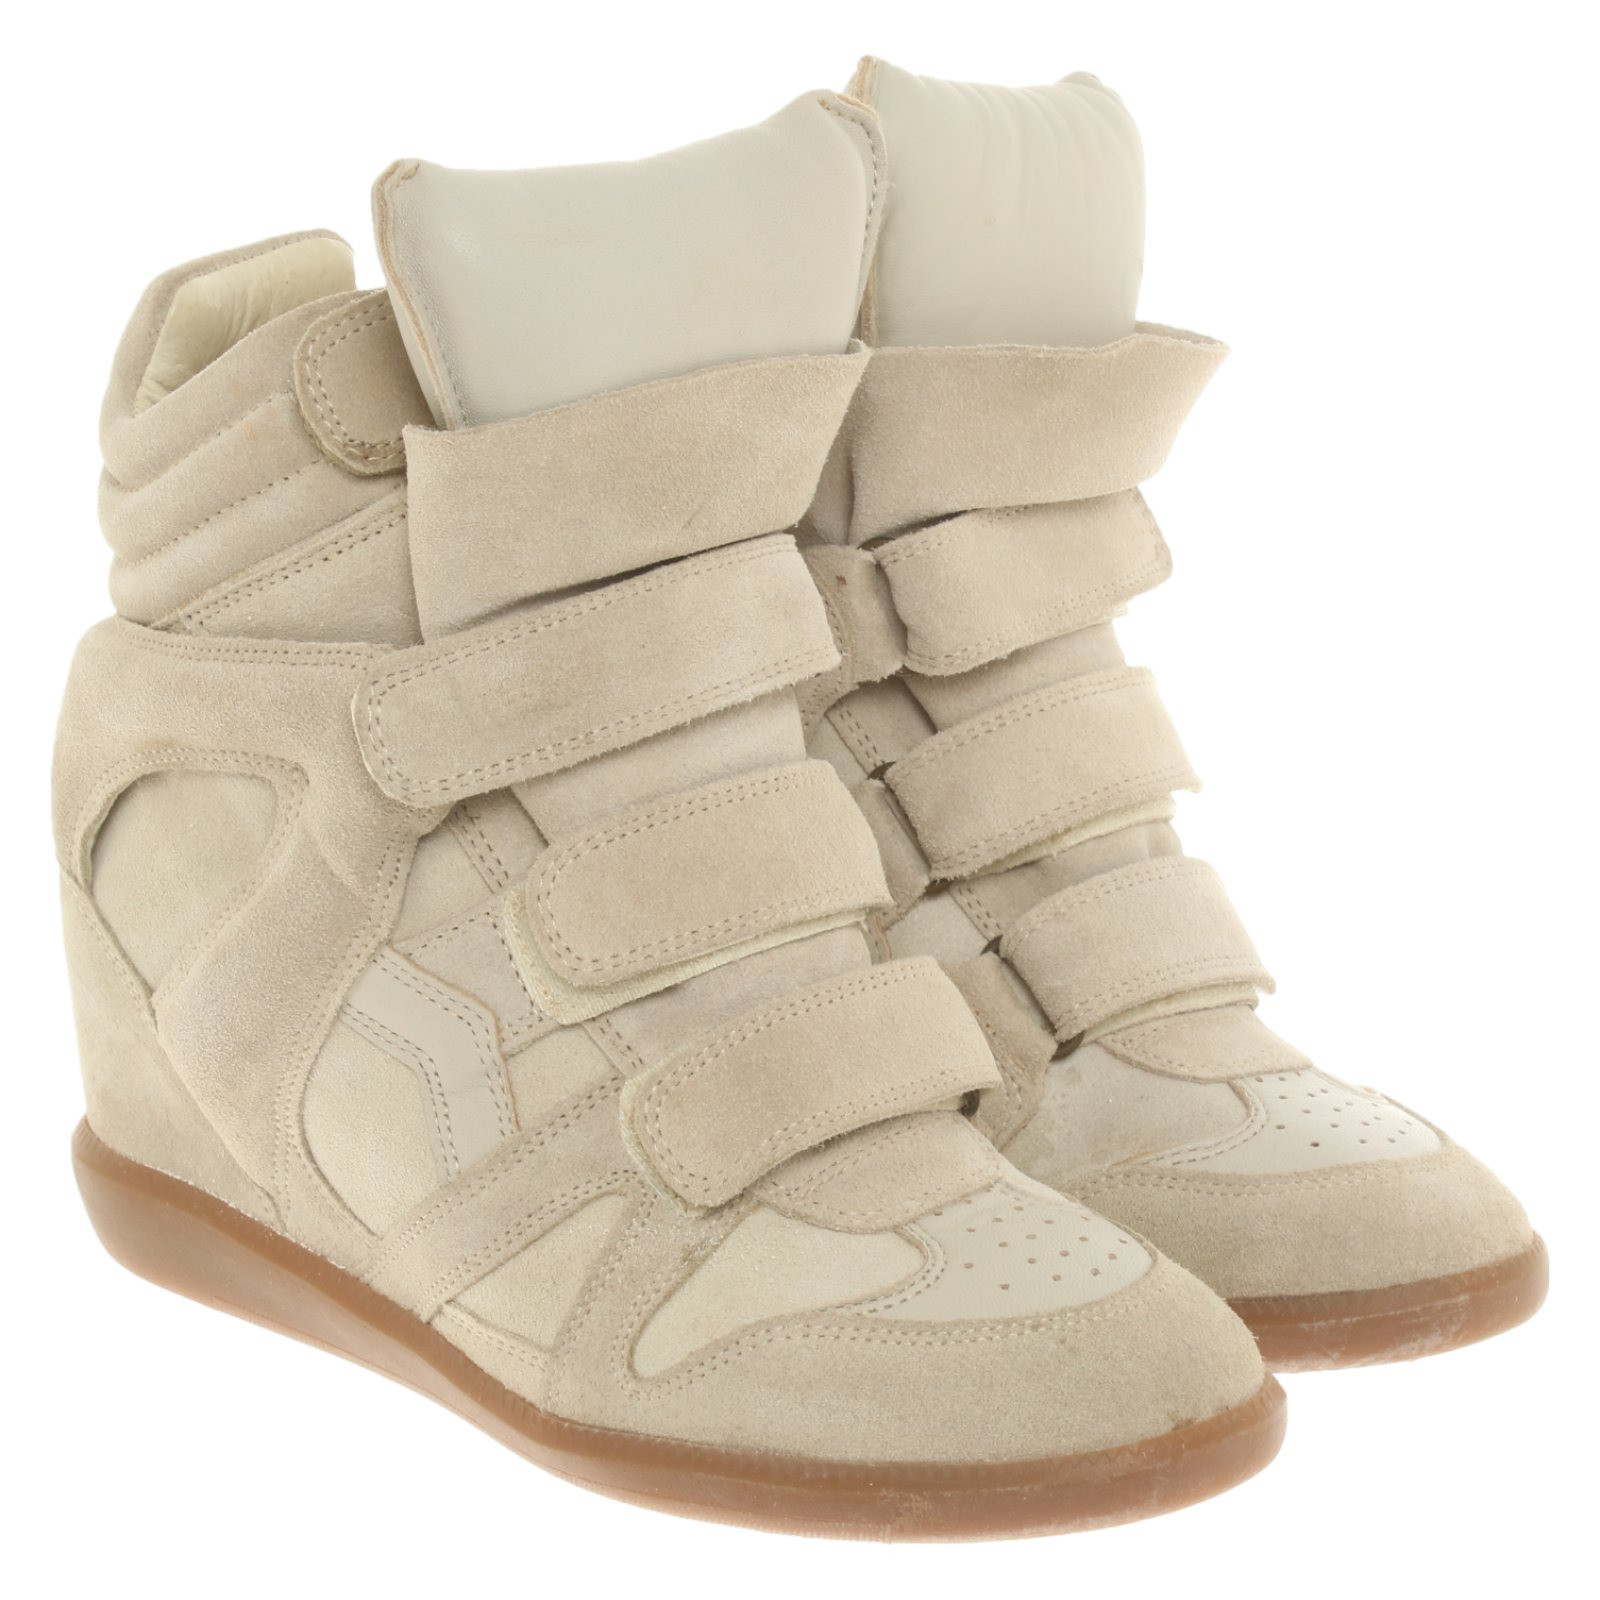 Isabel Marant in Beige - Second Hand Isabel Marant Trainers Leather in Beige buy used for 180€